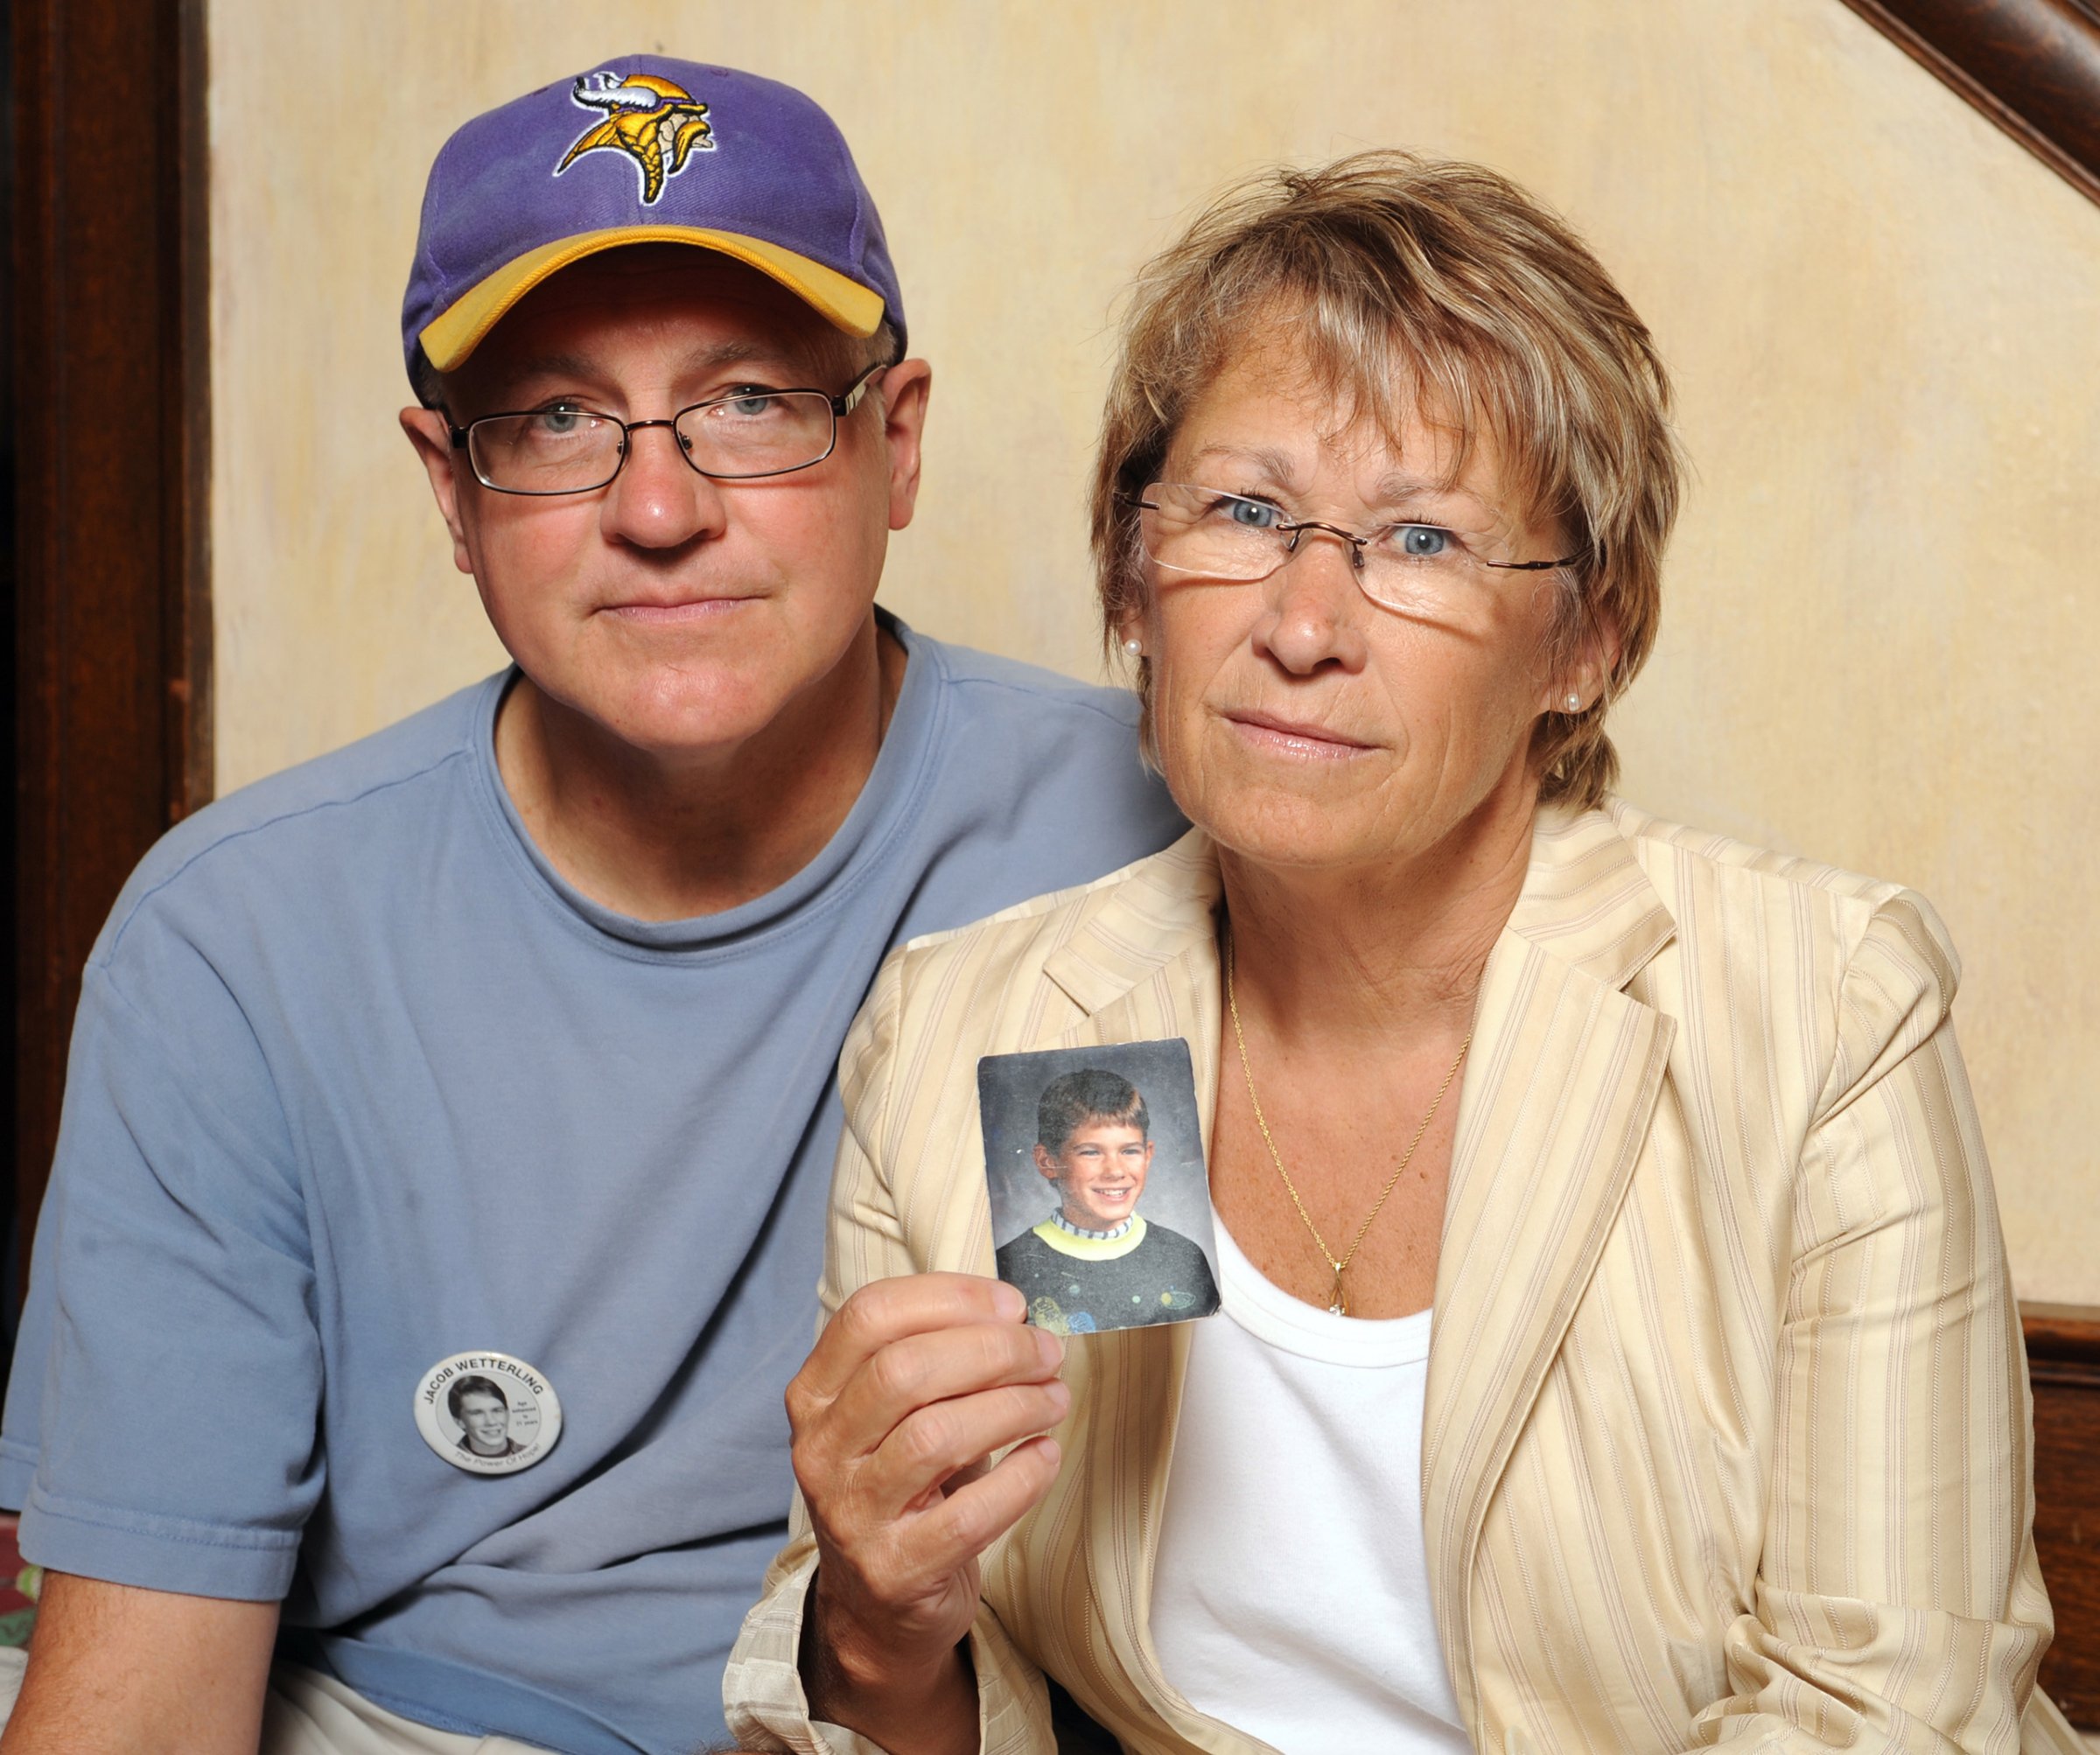 Patty and Jerry Wetterling show a photo of their son Jacob Wetterling, who was abducted in October of 1989 in St. Joseph, Minnesota, Aug. 28, 2009.